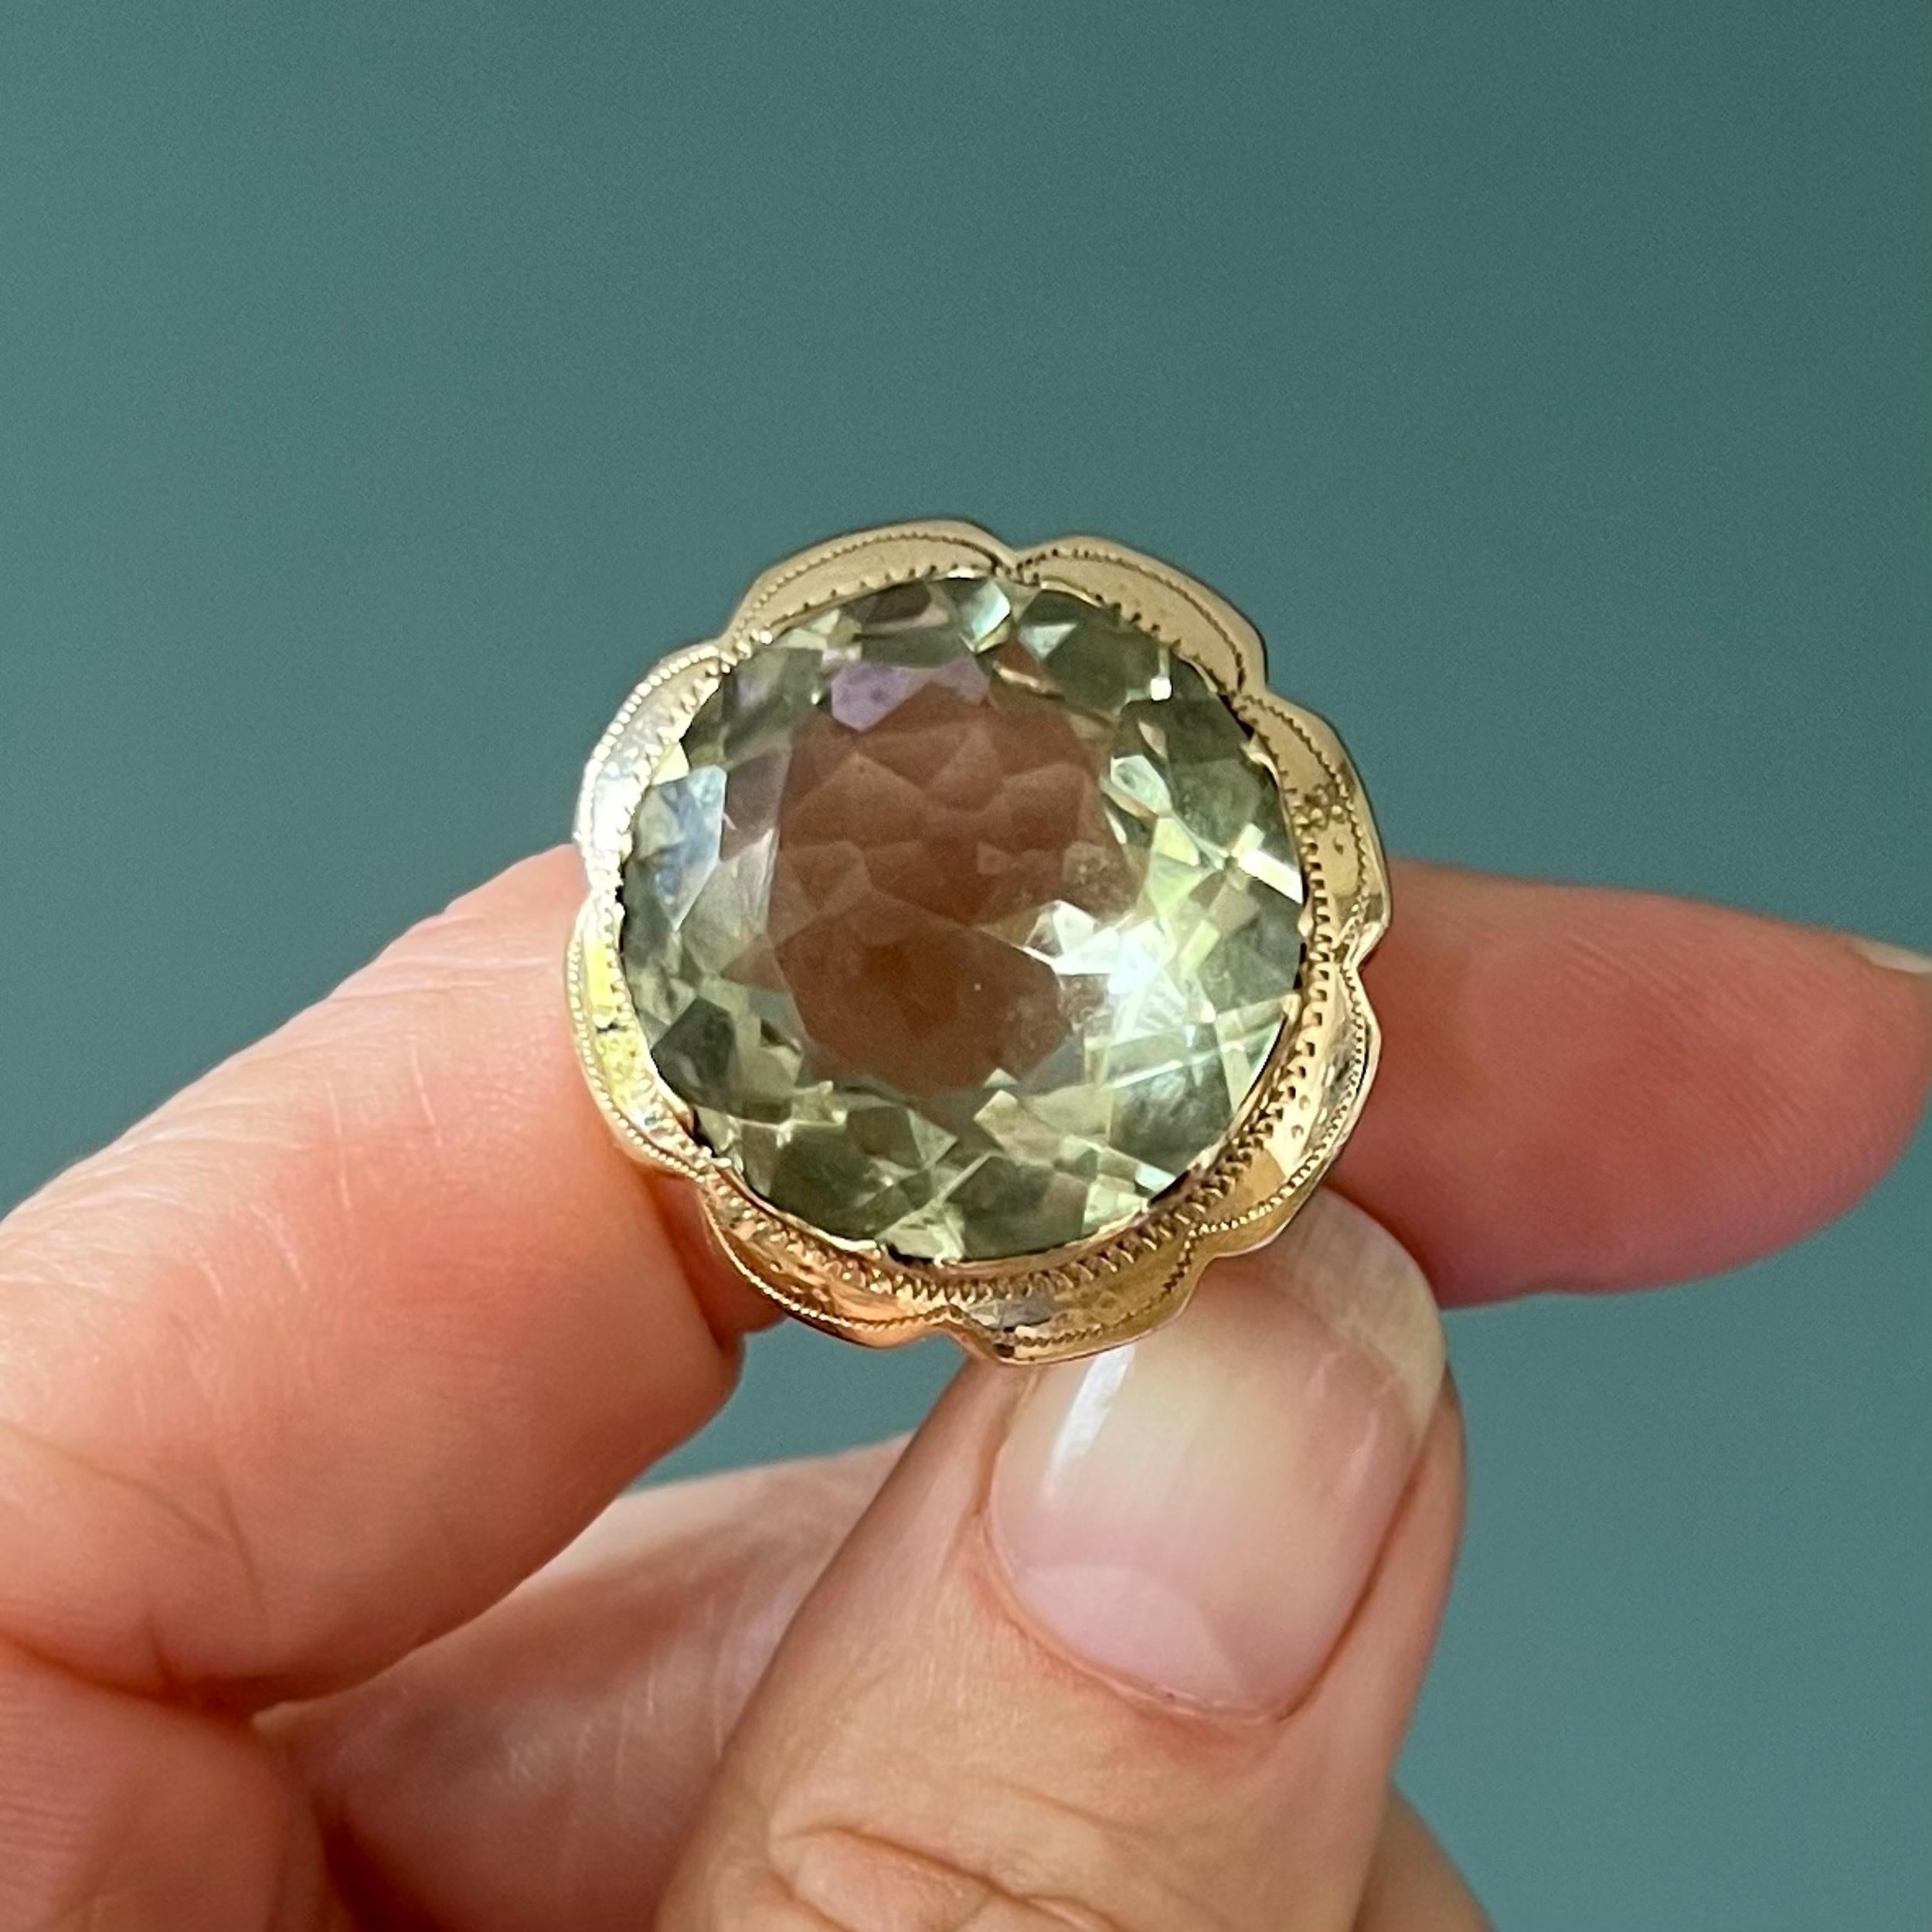 A vintage chunky 14 karat gold ring created with a green quartz stone. The gold has a lovely scalloped border with a fantasy engraved design. The quartz is just magnificent, it is very clear and bright in color. The frame of this chunky ring has an